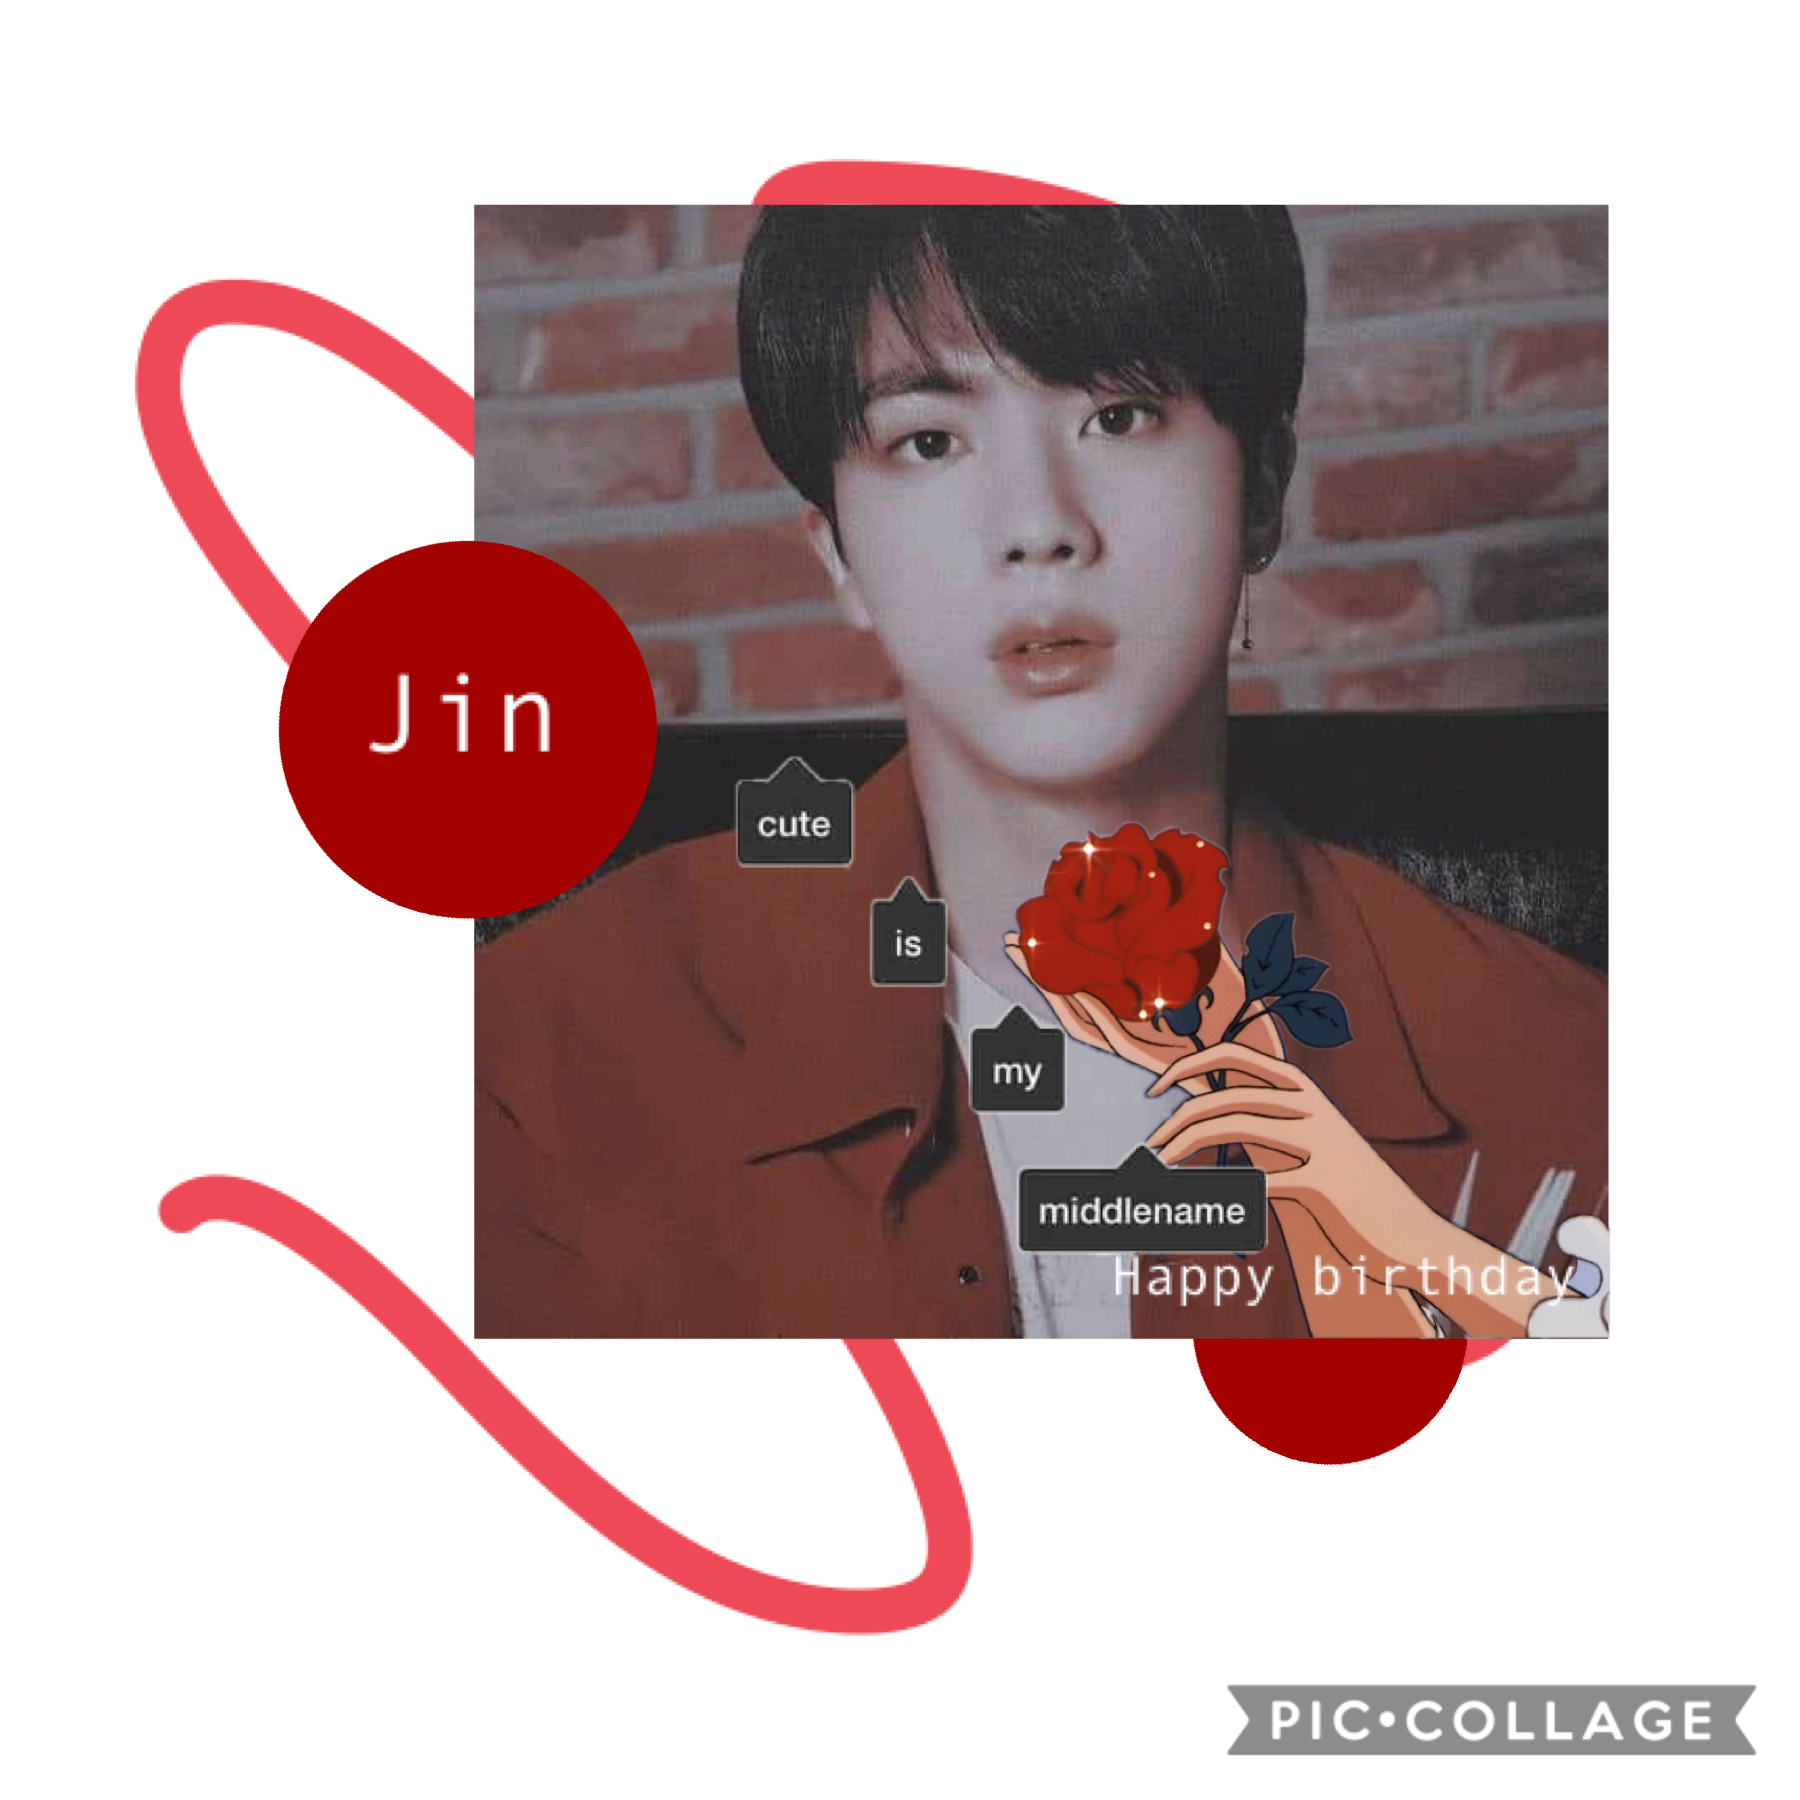 HAPPY (late oops) BIRTHDAY JIN, LOVE YOU SO MUCH❤️🌹